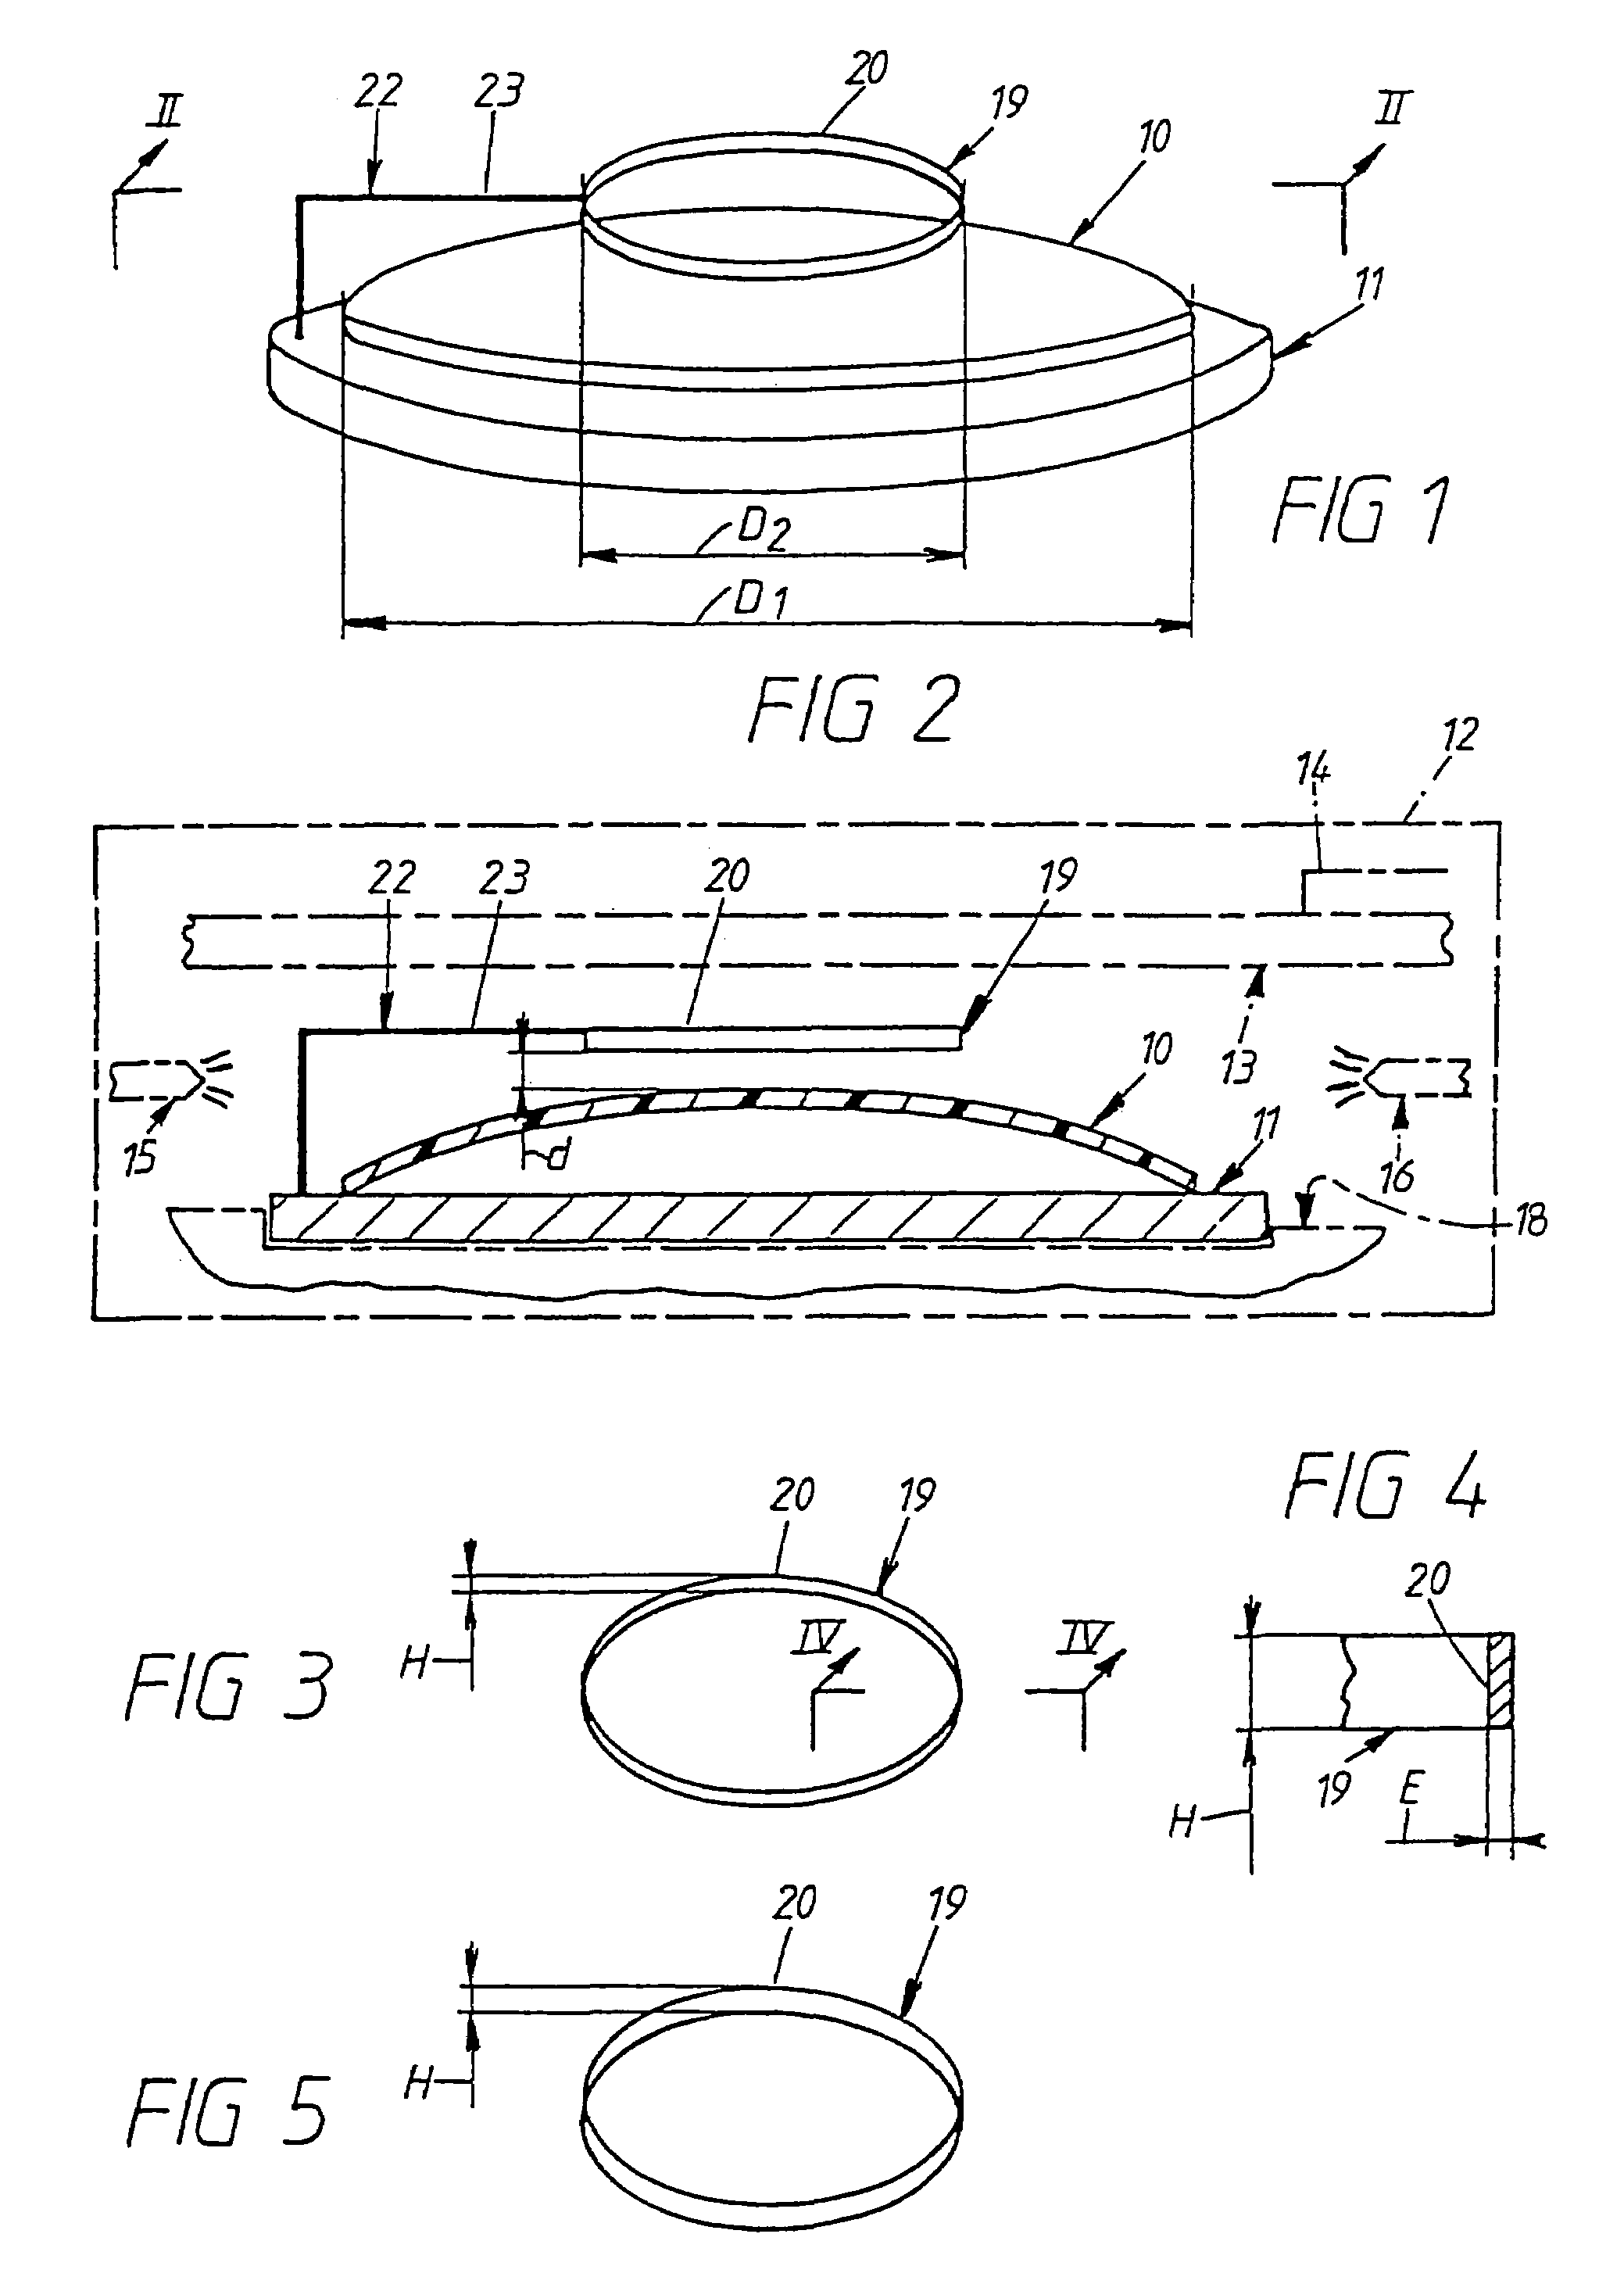 Method for vacuum deposit on a curved substrate